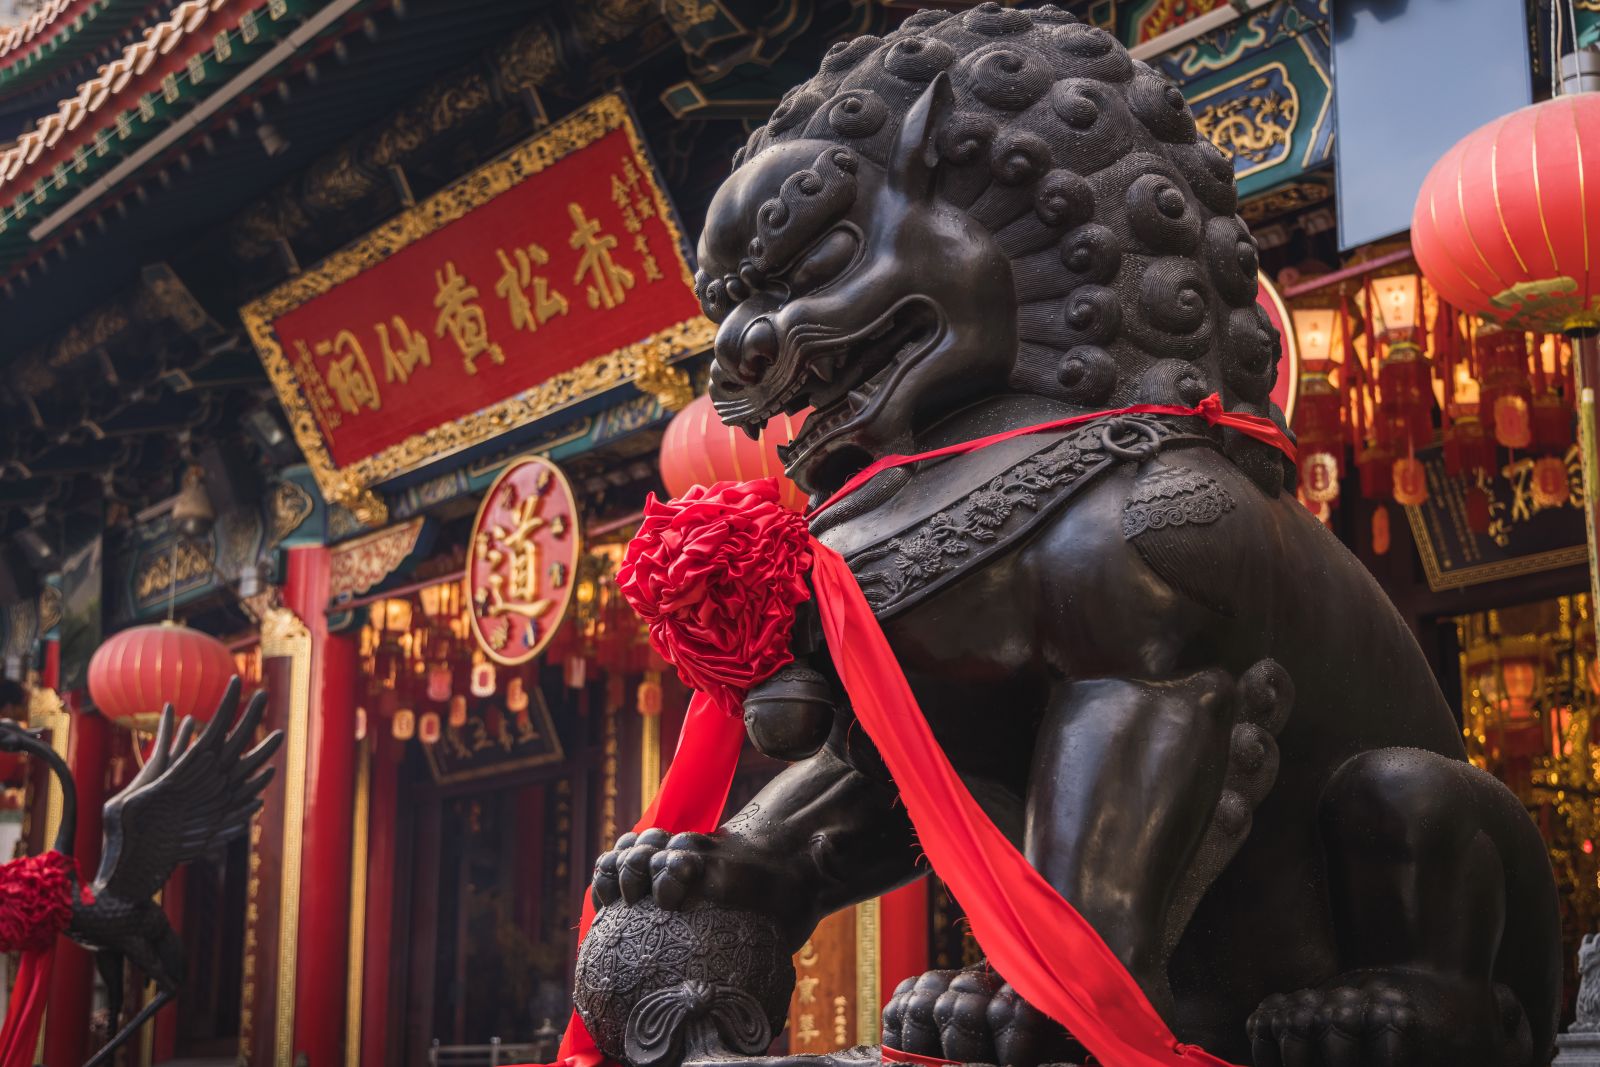 Guardian Lions are believed to be the protectors of the temple